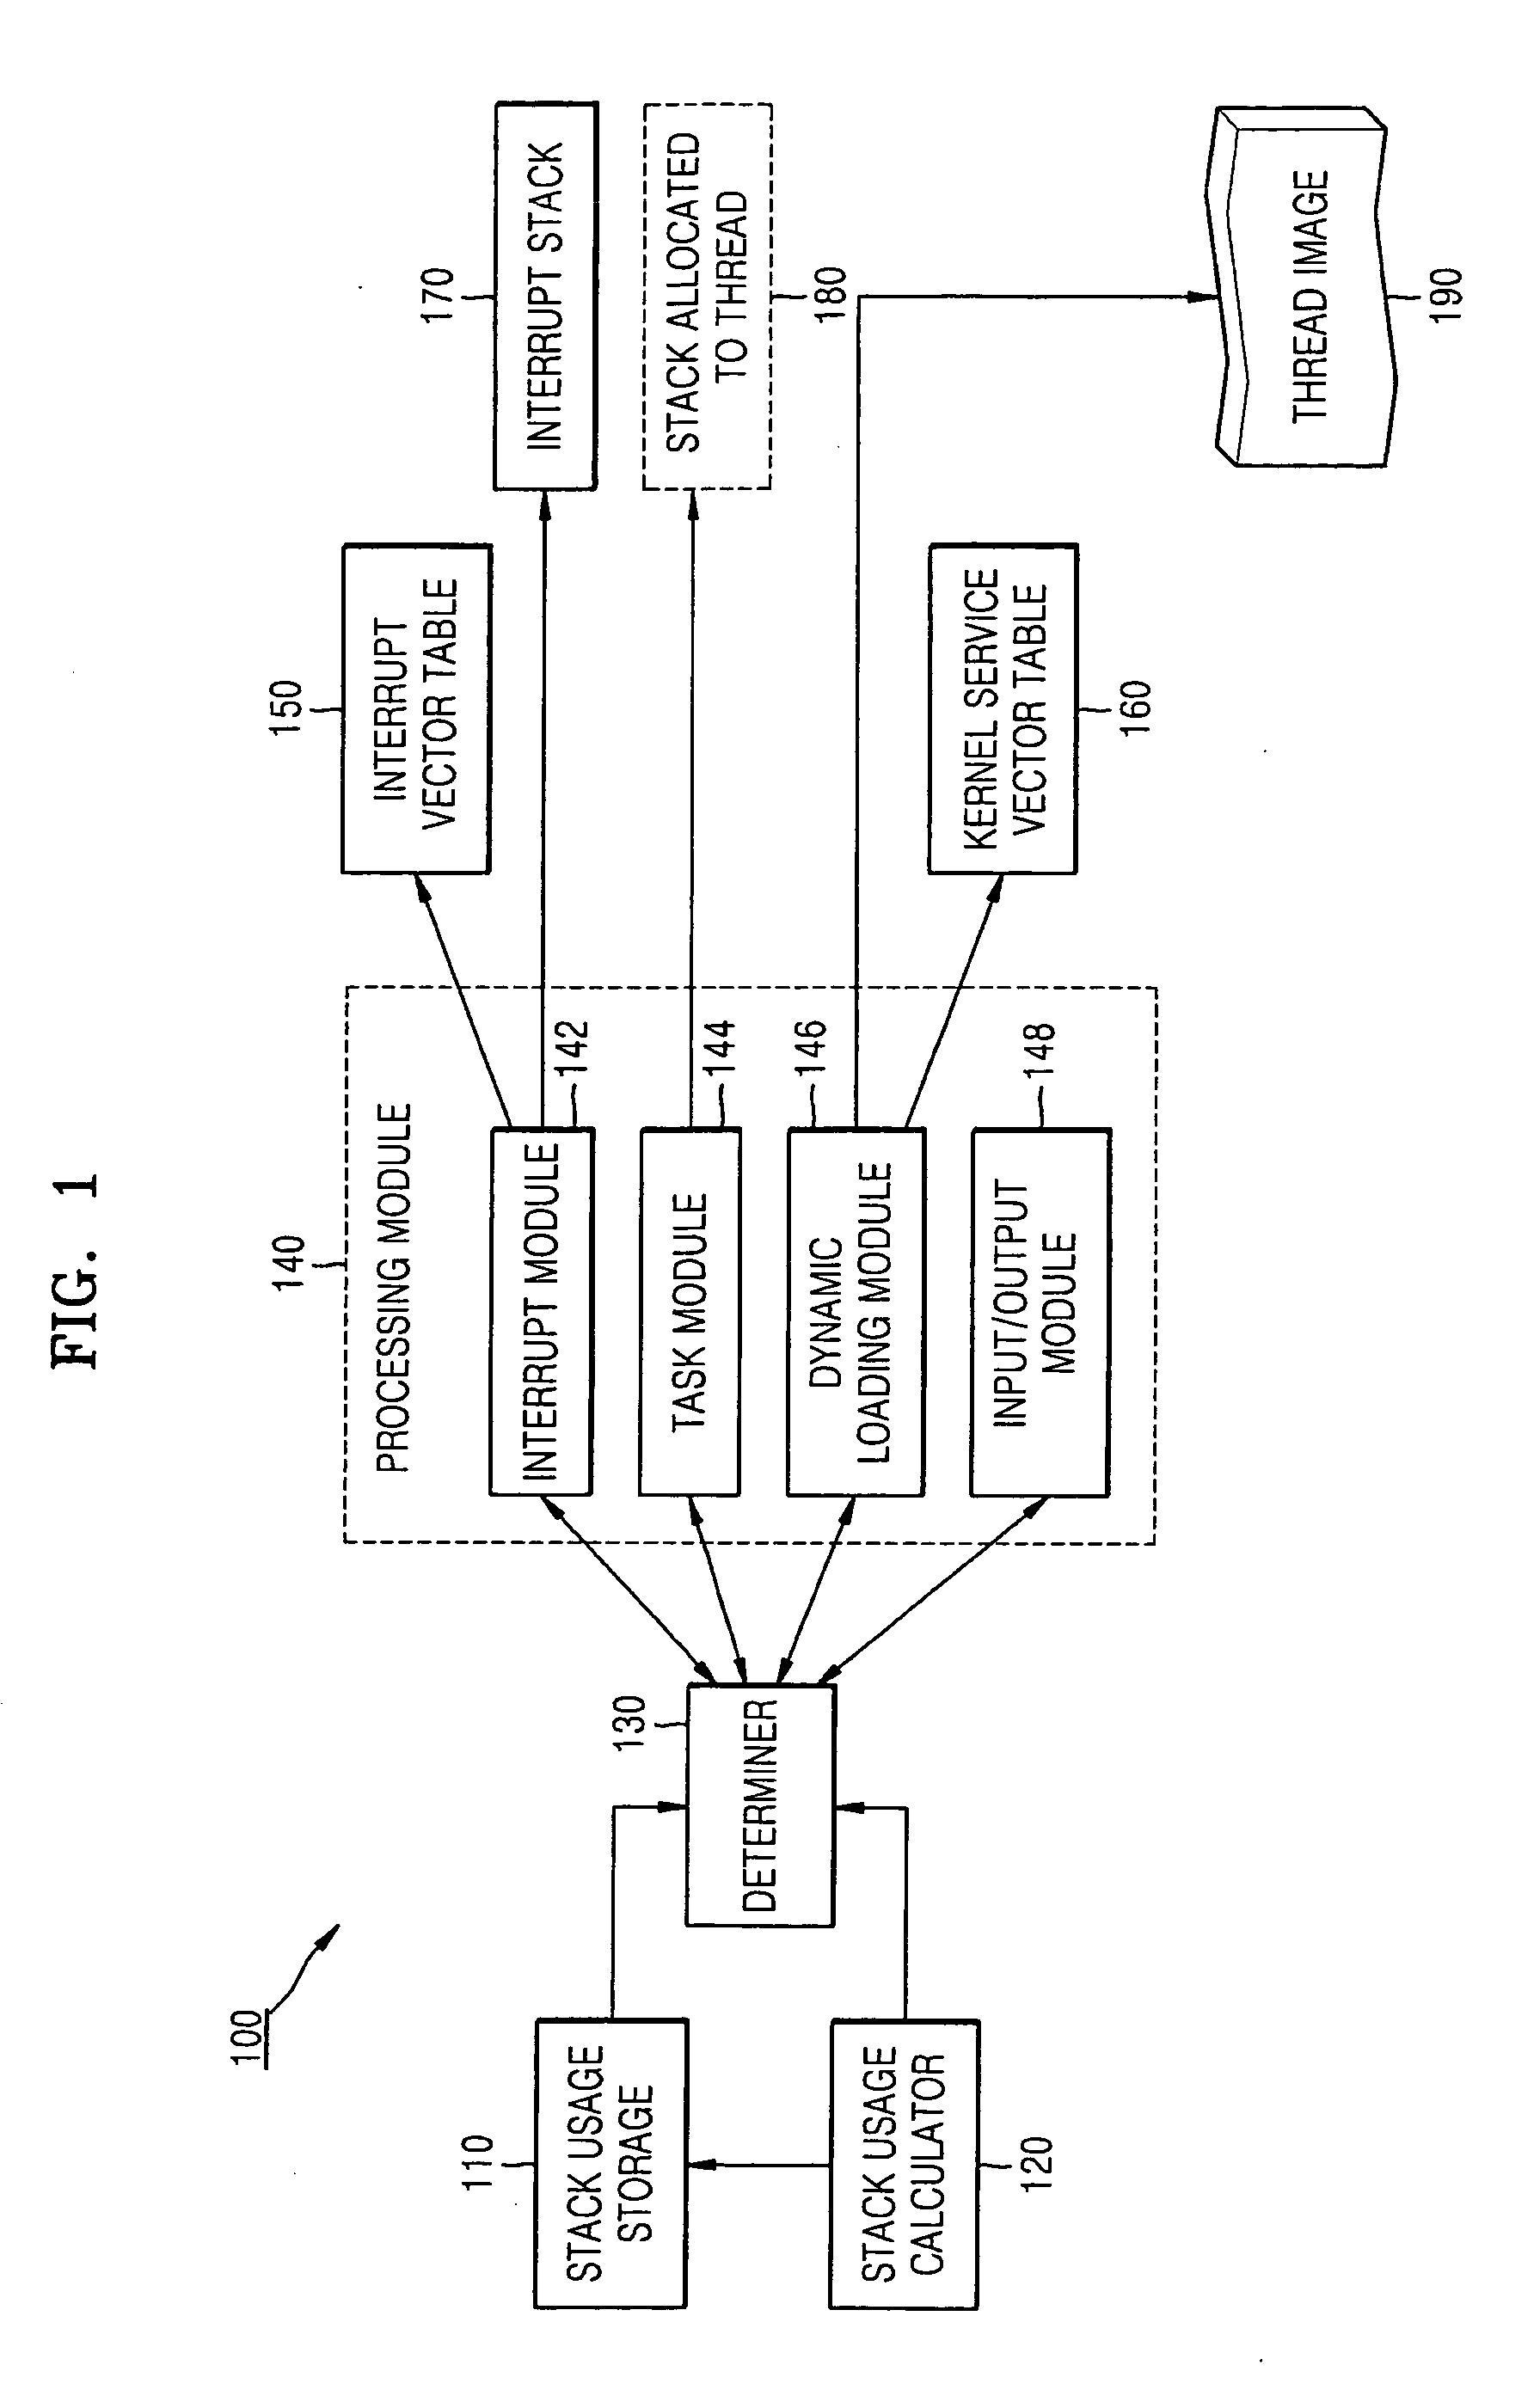 Method and apparatus for preventing stack overflow in embedded system